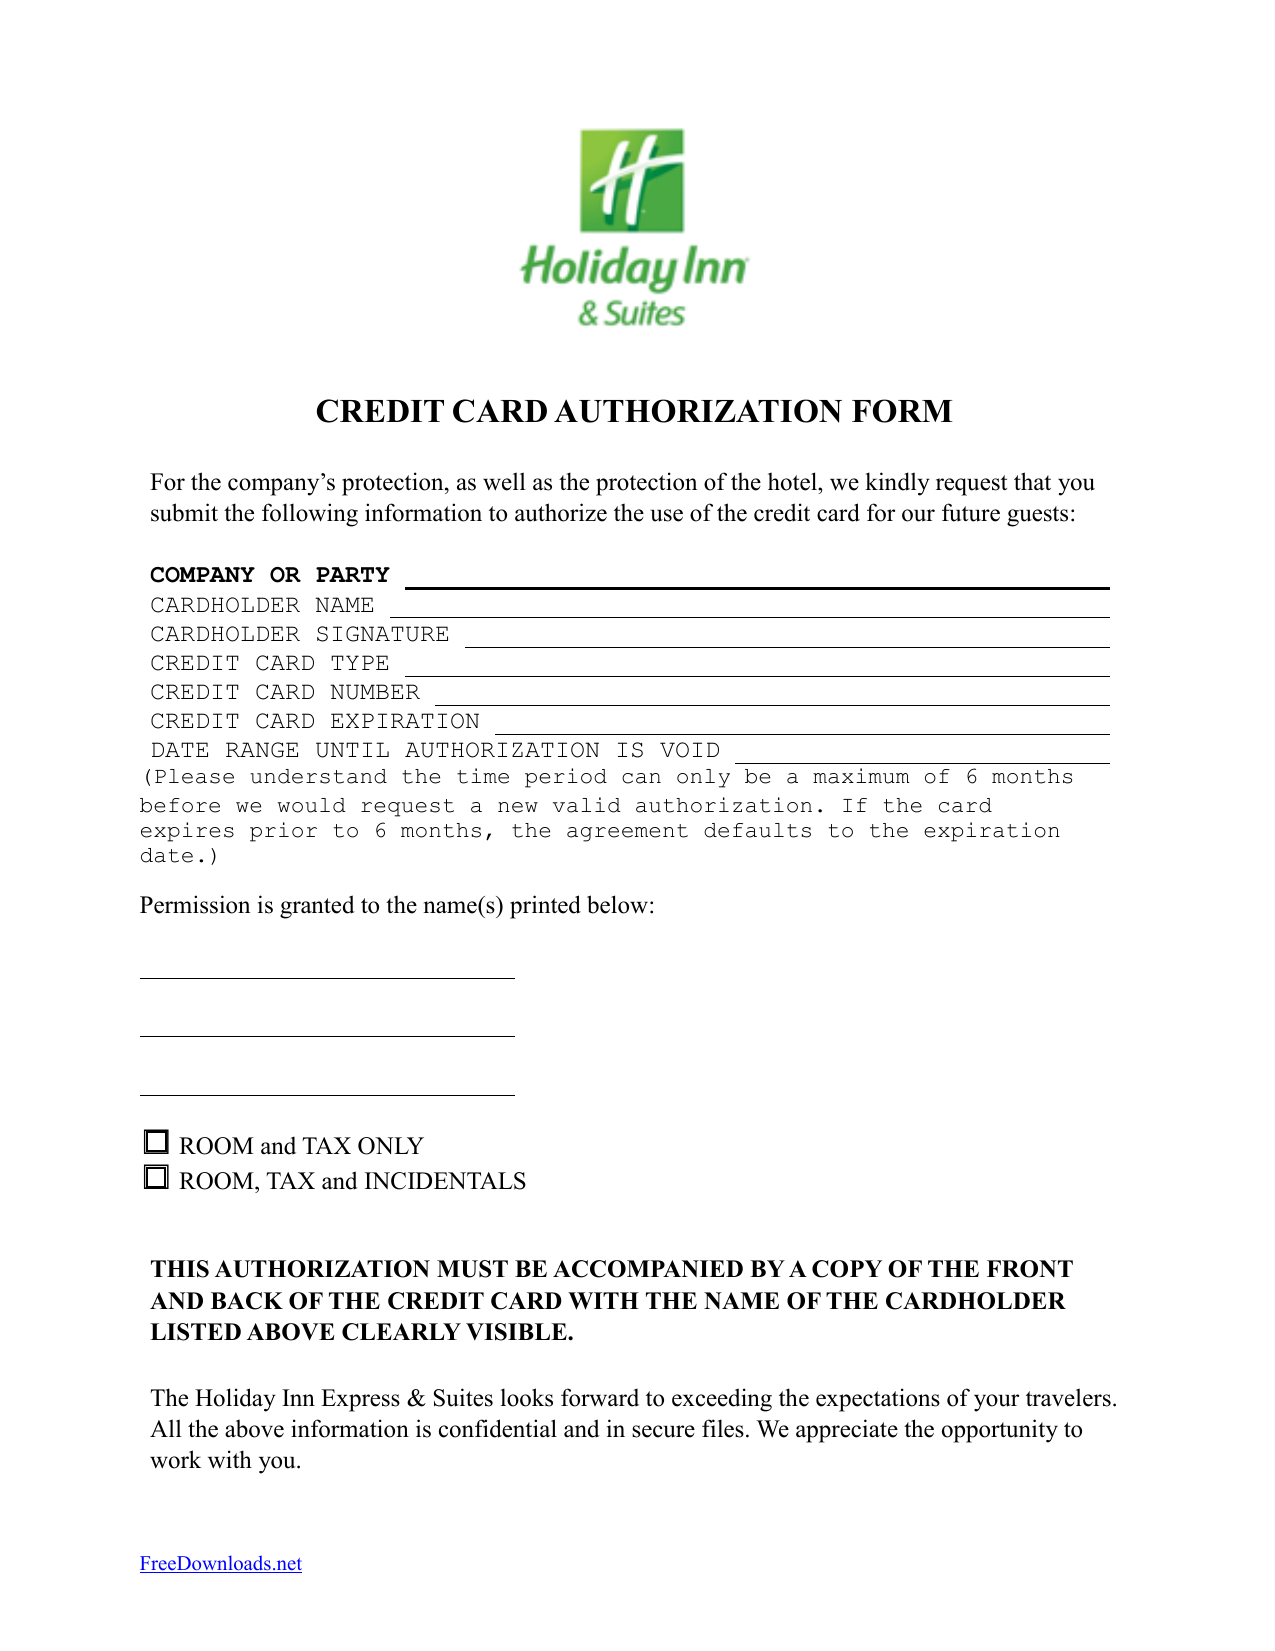 Download Holiday Inn Credit Card Authorization Form Template Within Hotel Credit Card Authorization Form Template